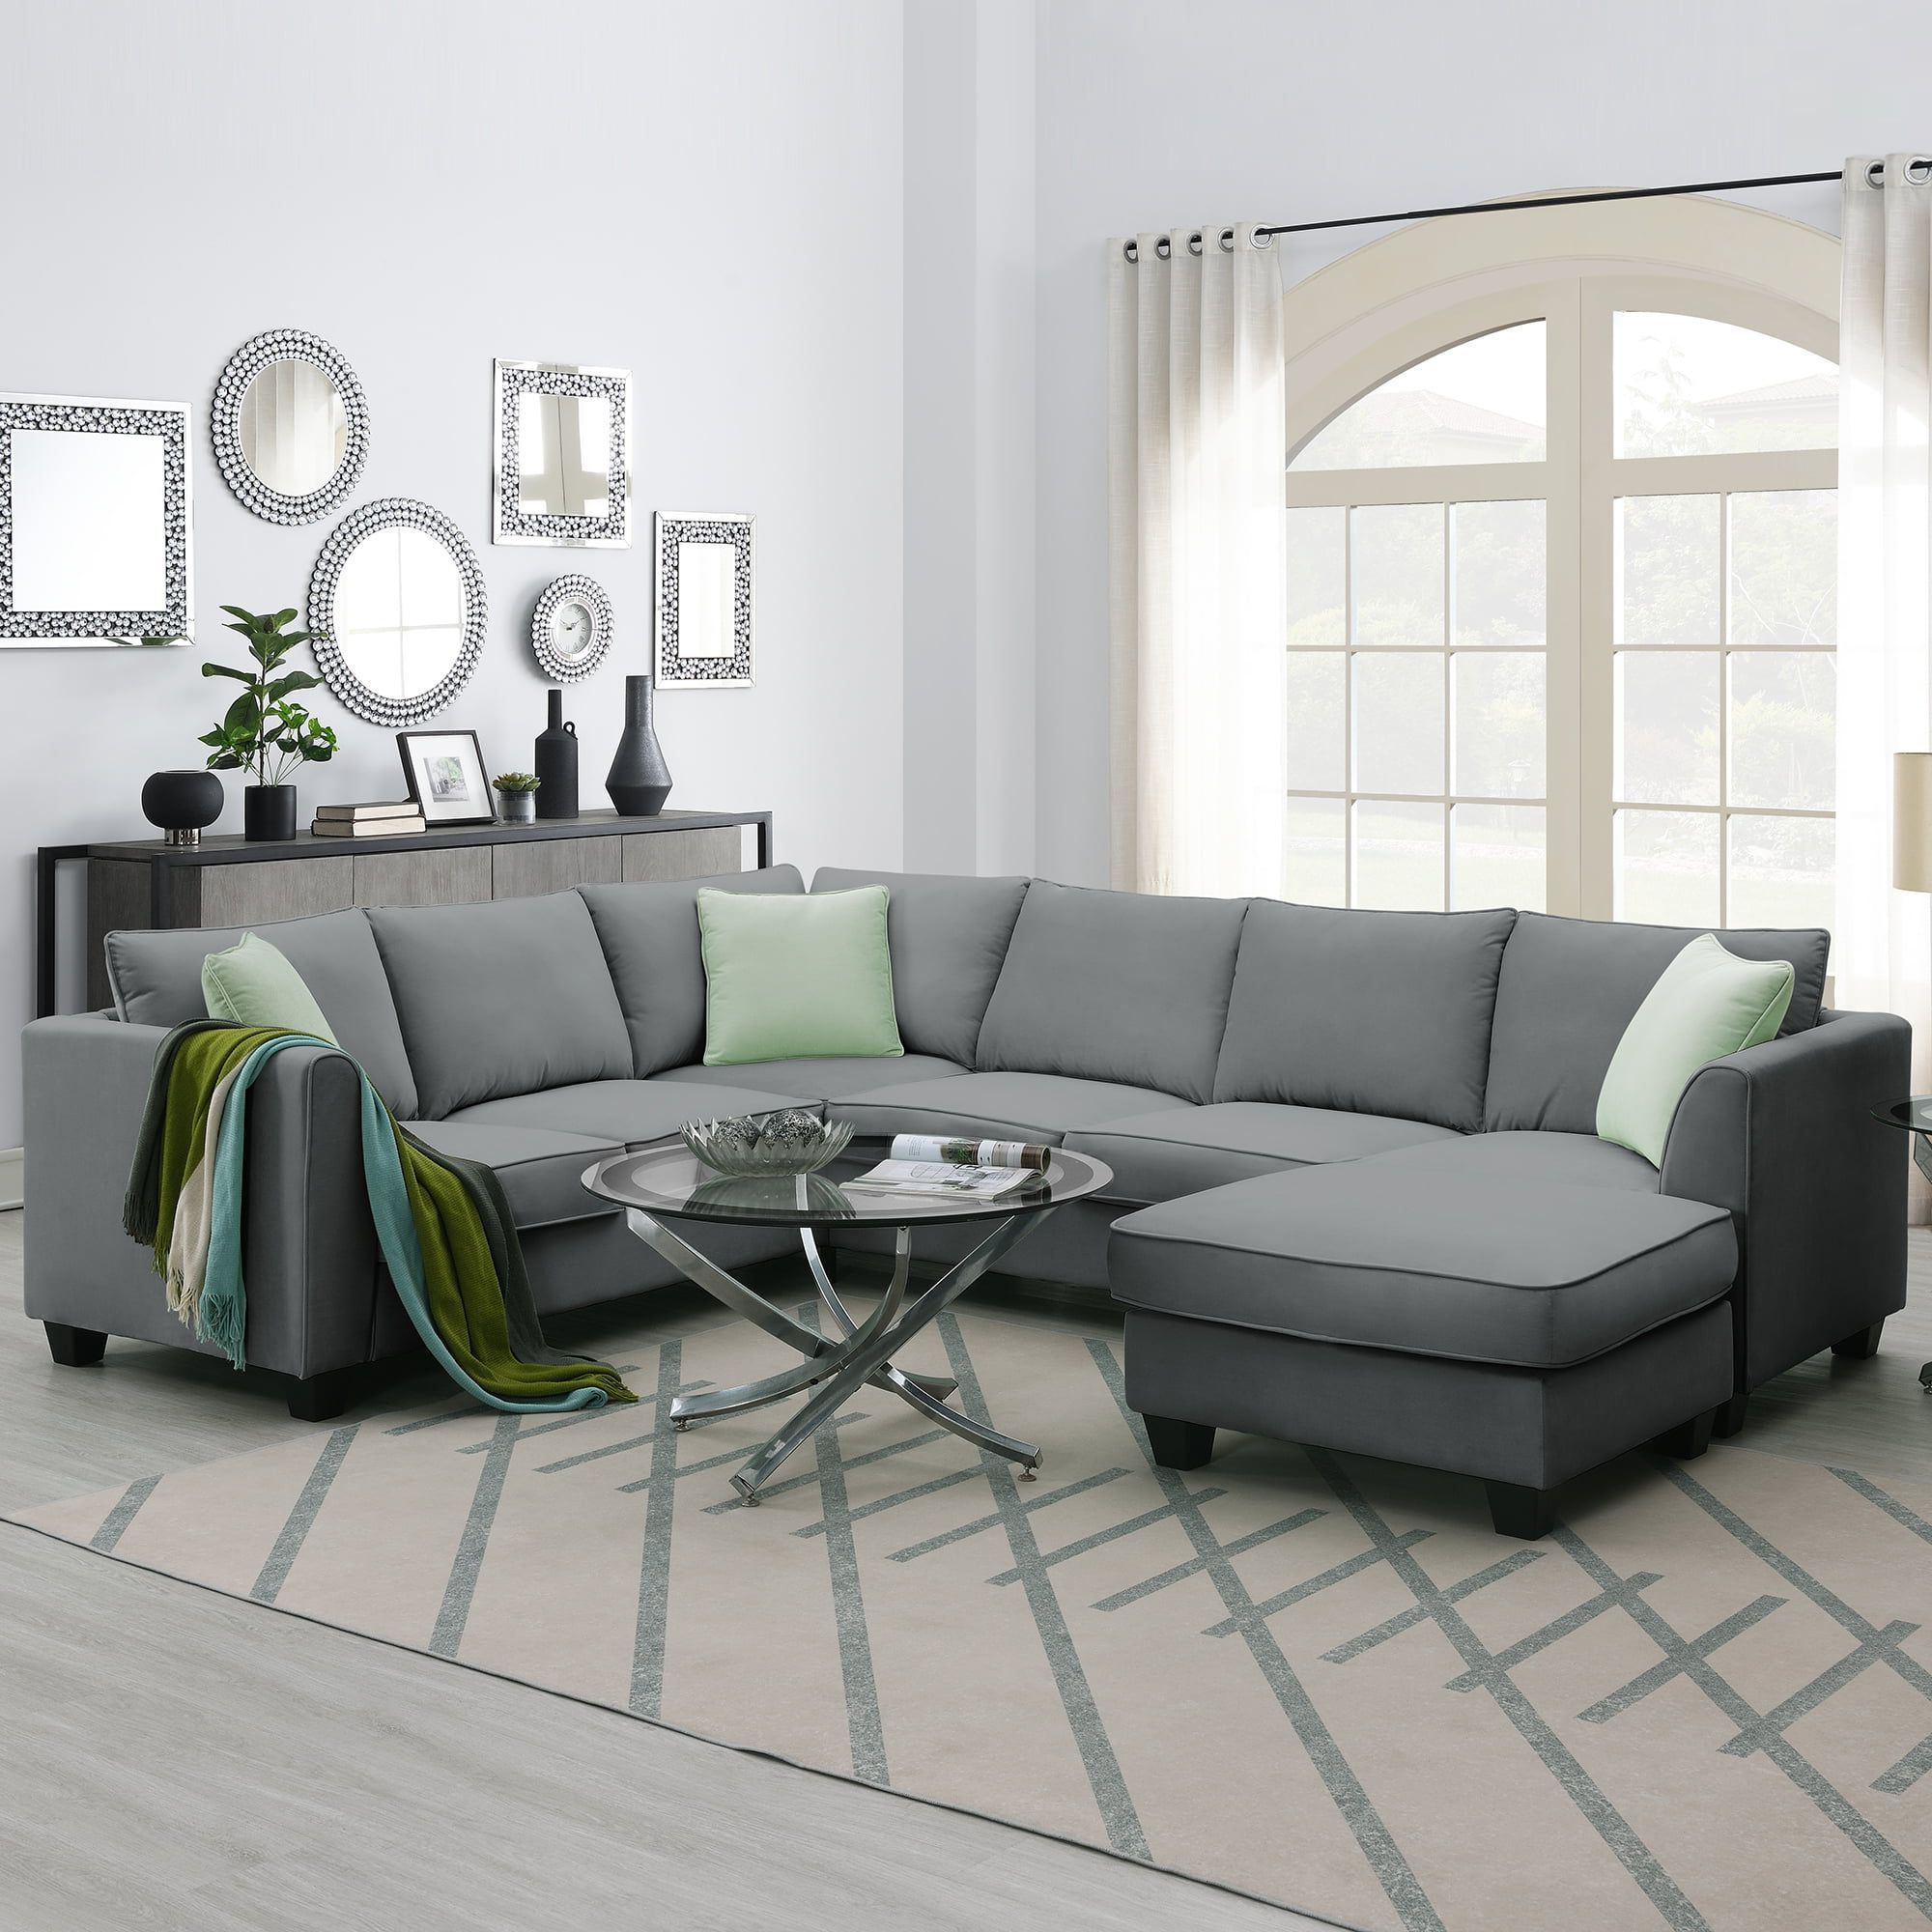 L Shaped Modular Sectional Couch, Kamida 7 Seater Sectional Couch With  Ottoman And 3 Pillows, Modern L Shaped Fabric Upholstered Couch Furniture,  Heavy Duty Sectional Couch For Living Room, Gray – Walmart For Modern L Shaped Fabric Upholstered Couches (View 3 of 20)